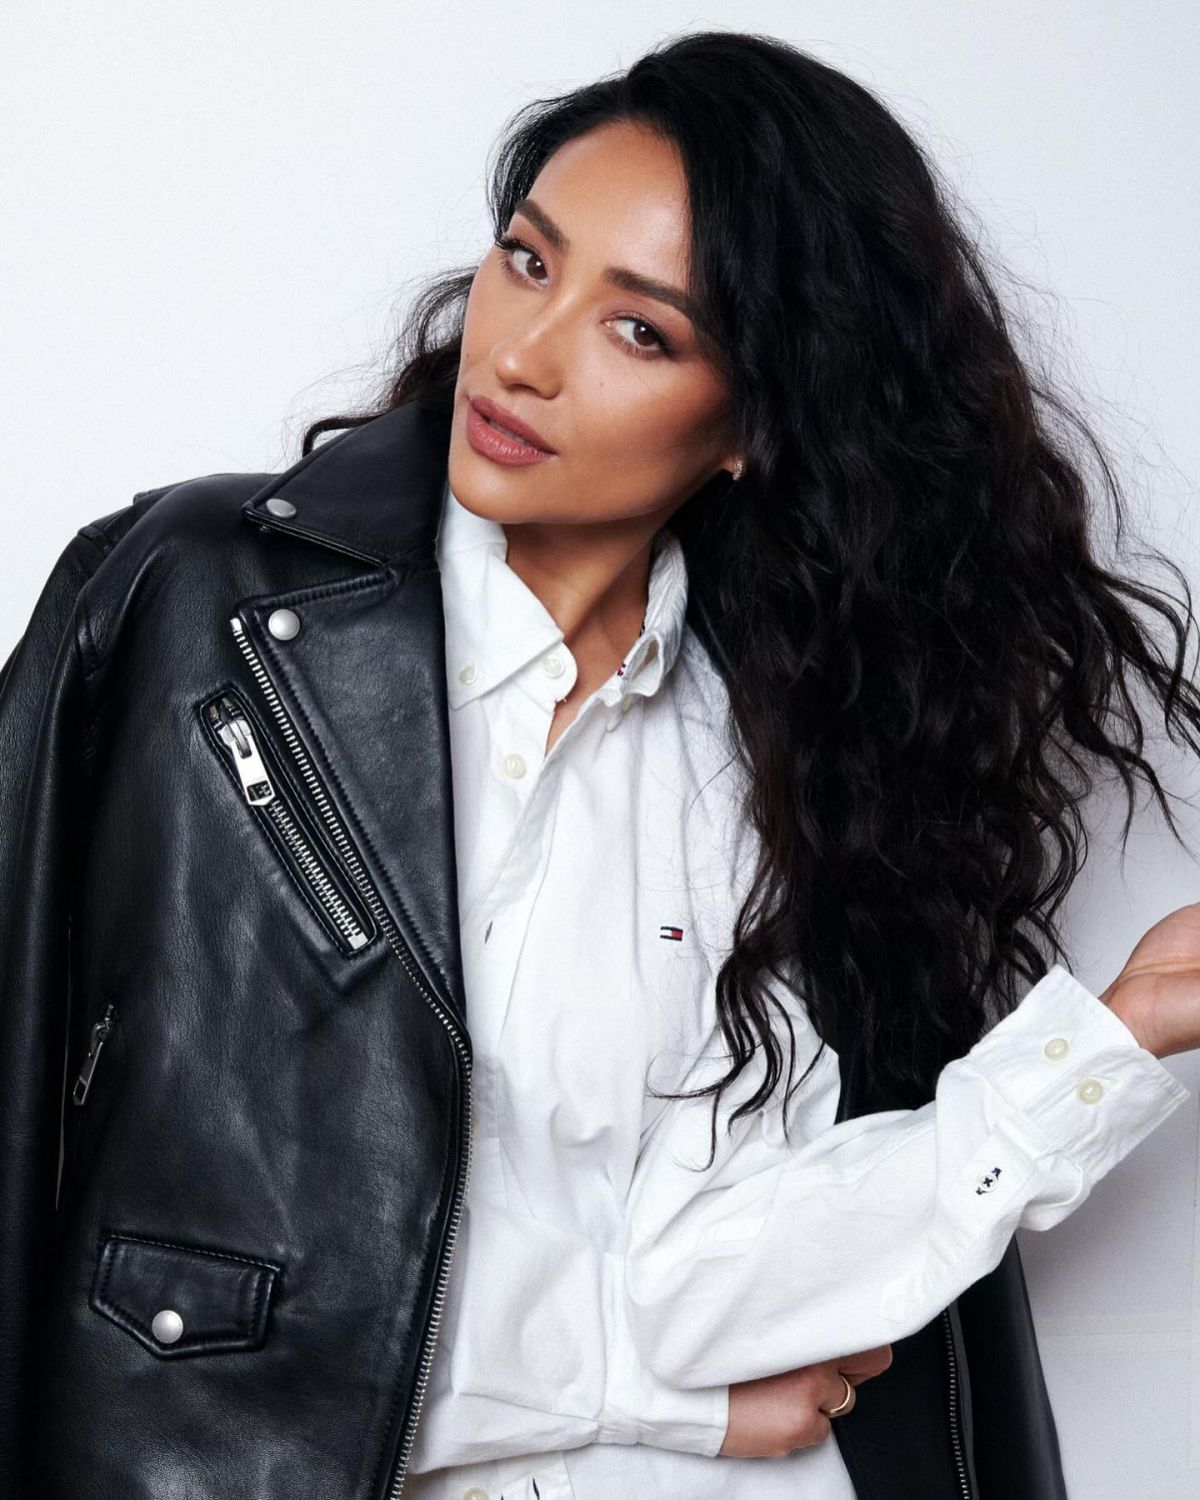 Fashion icon Shay in classic American cool attire by Tommy